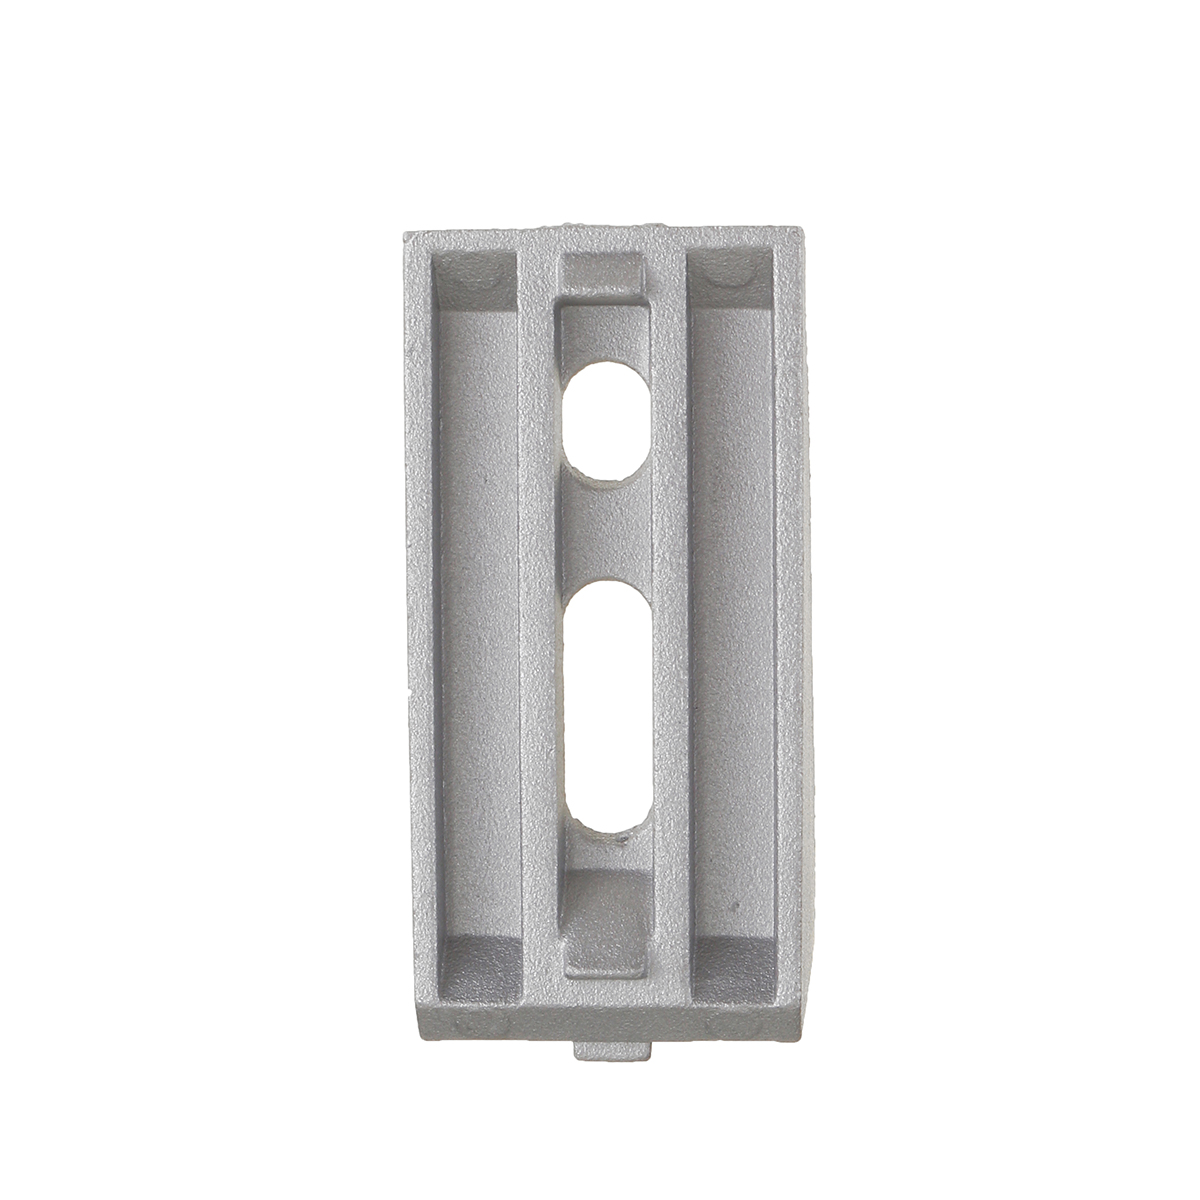 Sulevetrade-AJ40-40times80mm-Aluminum-Angle-Corner-Joint-Connector-90-degrees-4080-Series-Aluminum-P-1293672-8